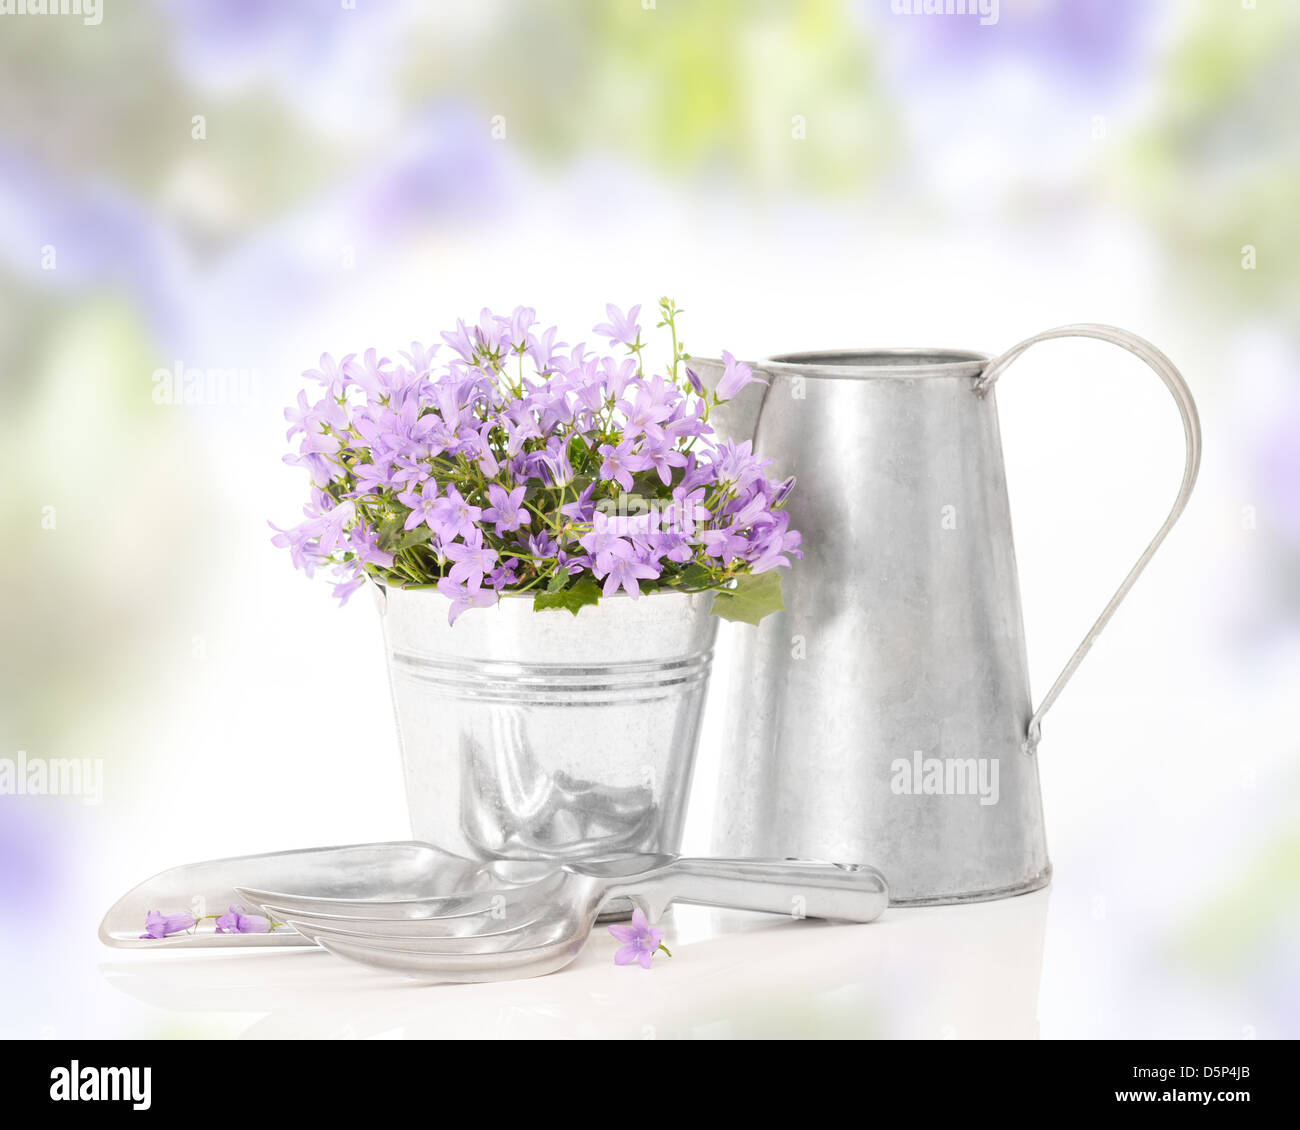 Pretty Companula flowers in bucket with watering jug and abstract background Stock Photo